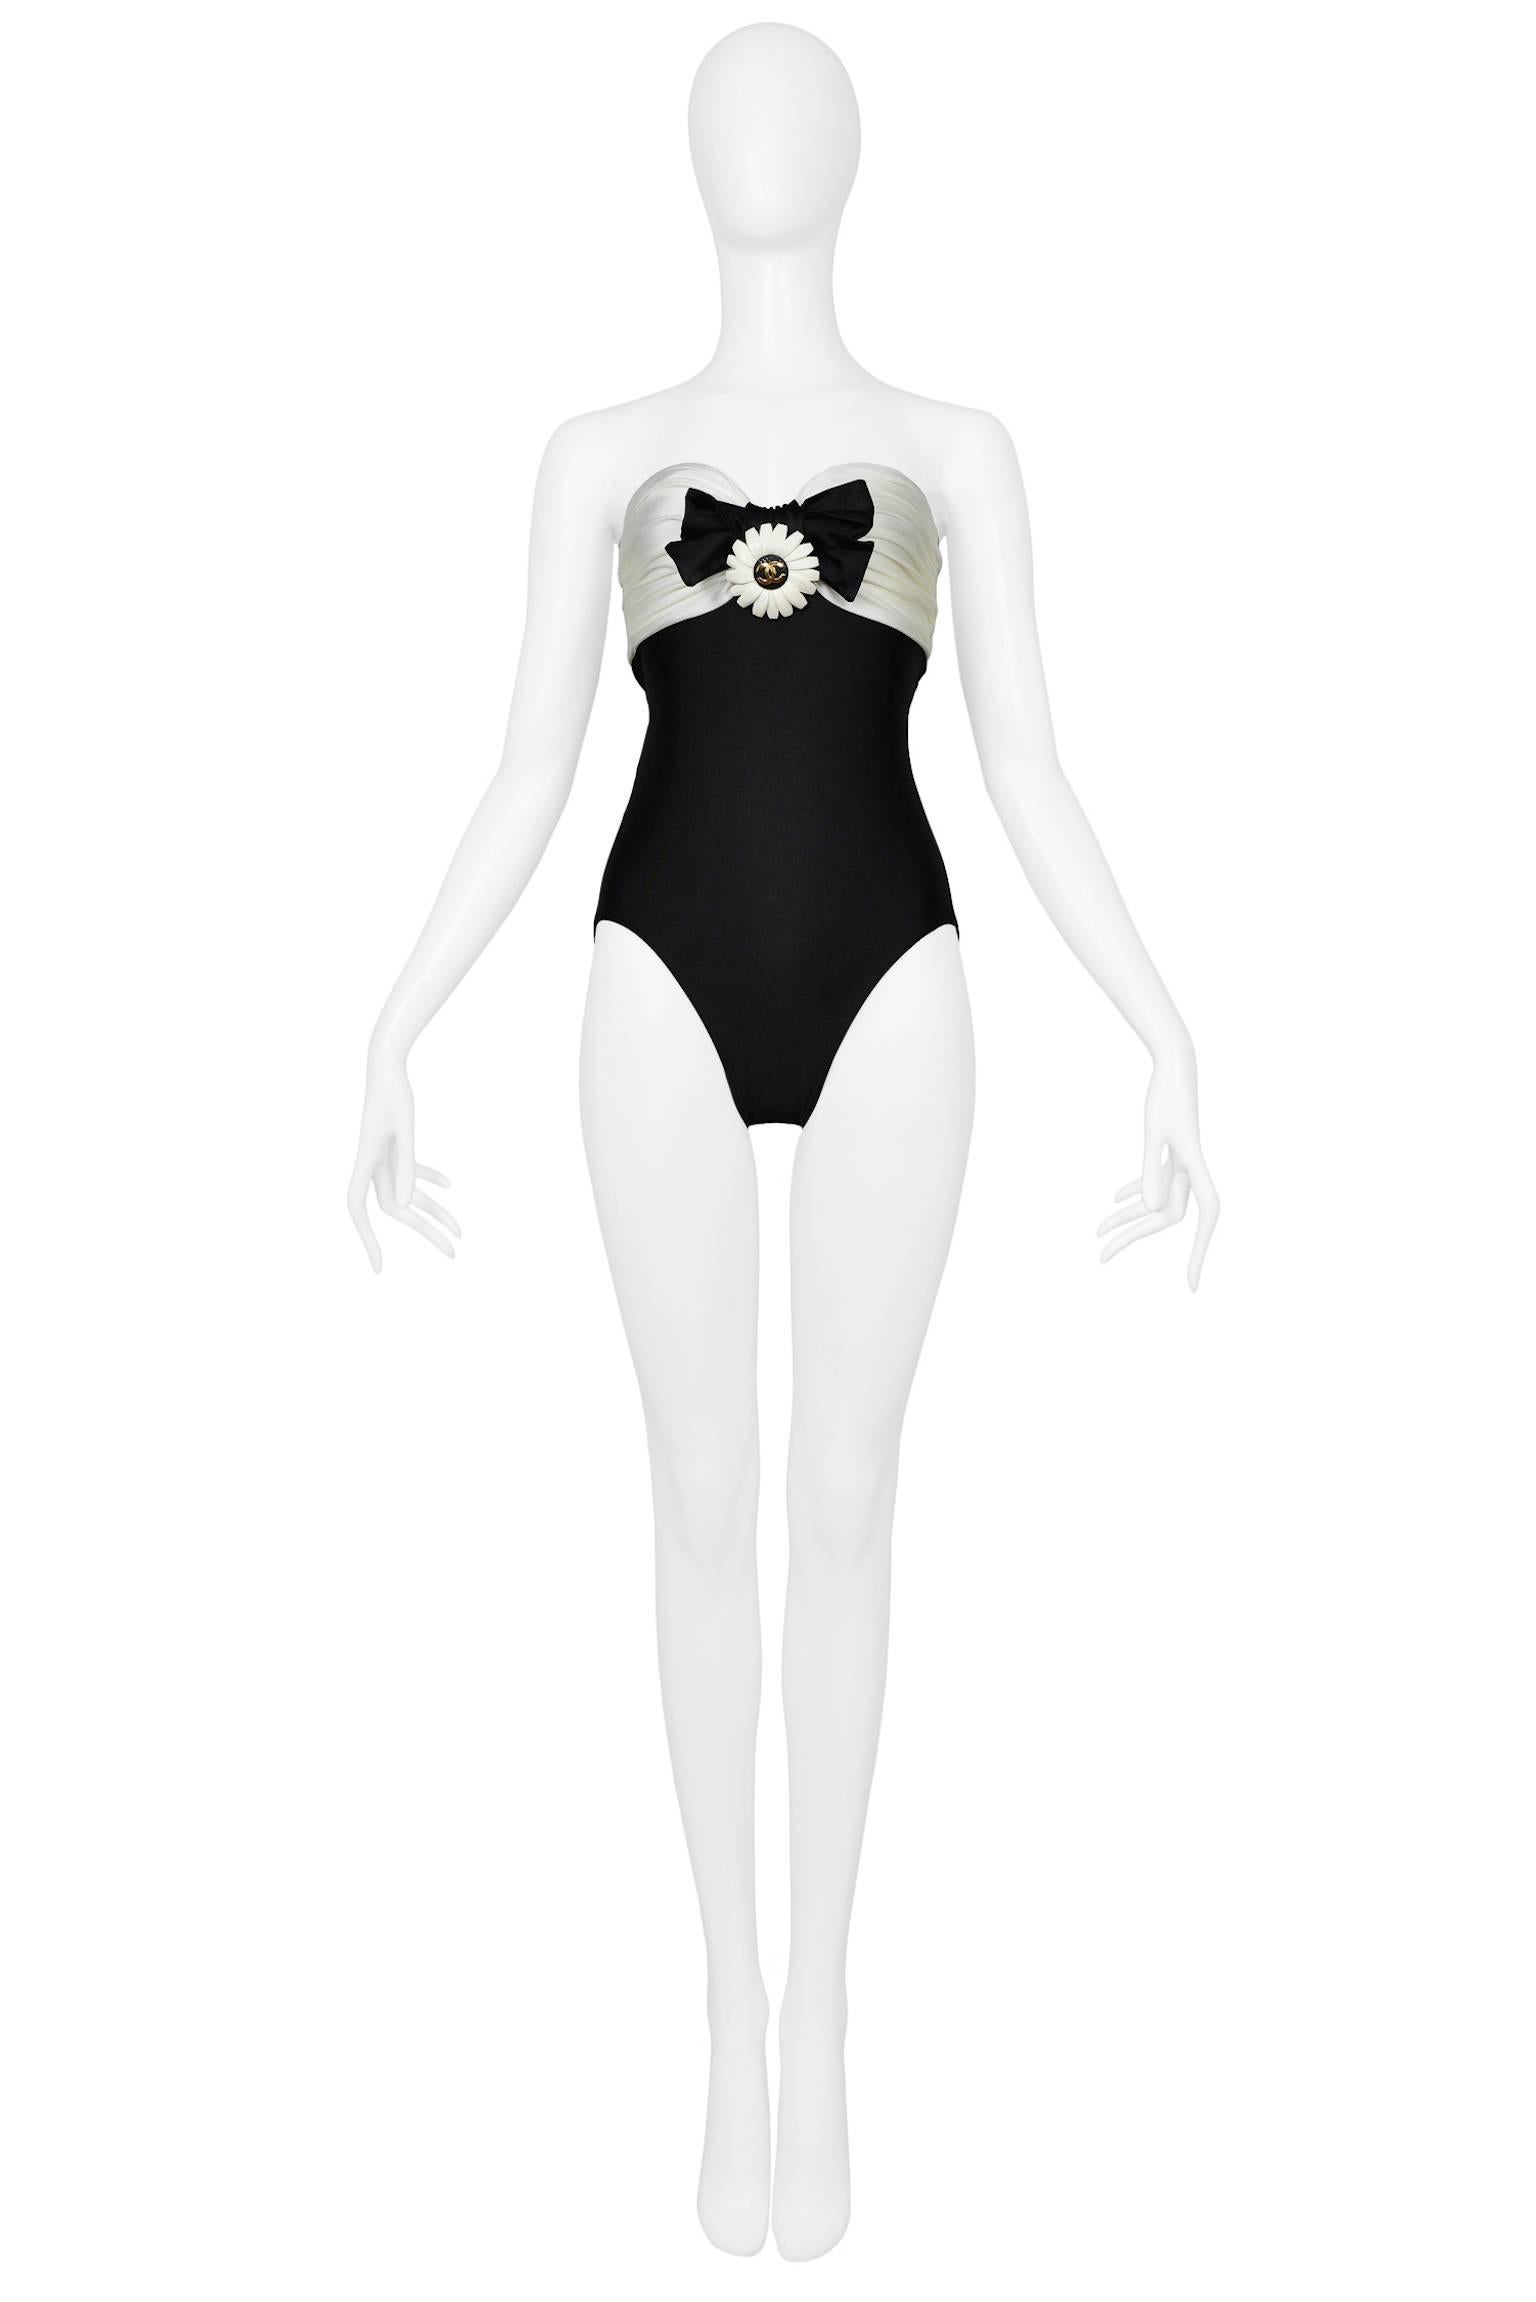 Vintage Chanel black and white swimsuit with black bow and cast or molded sculptural plastic off white daisy flower with gold CC emblem at front. This piece features an off-the-shoulder neckline, sweetheart bust line, and full cover bottom. Never